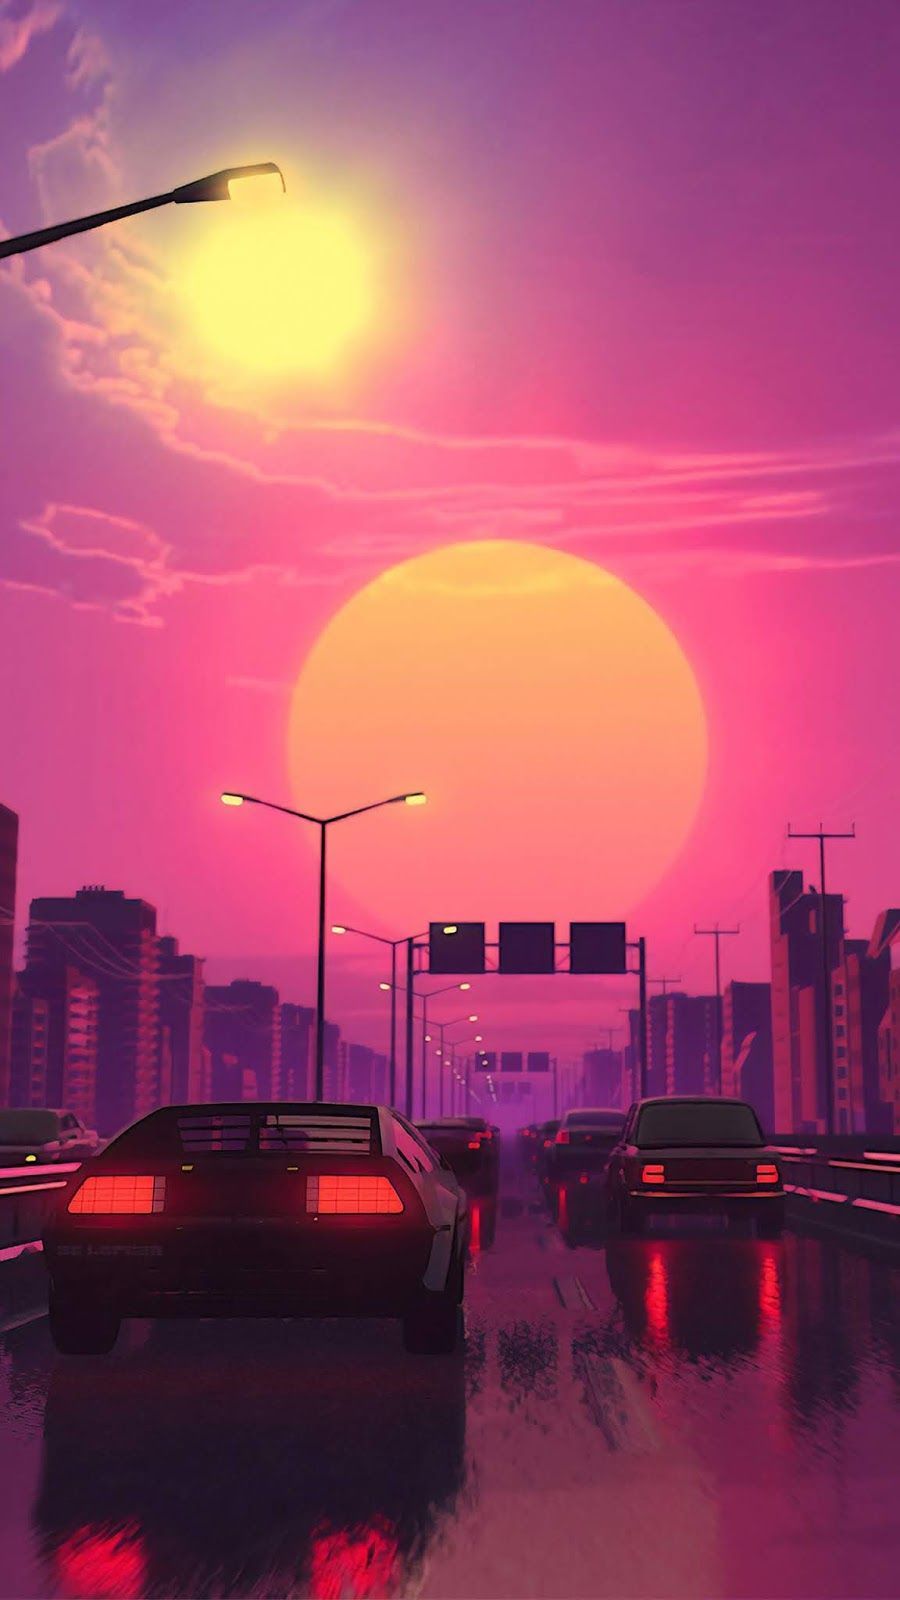 Vaporwave Sunset #wallpaper #iphone #android #background #followme. iPhone wallpaper vaporwave, Vaporwave wallpaper, Aesthetic wallpaper